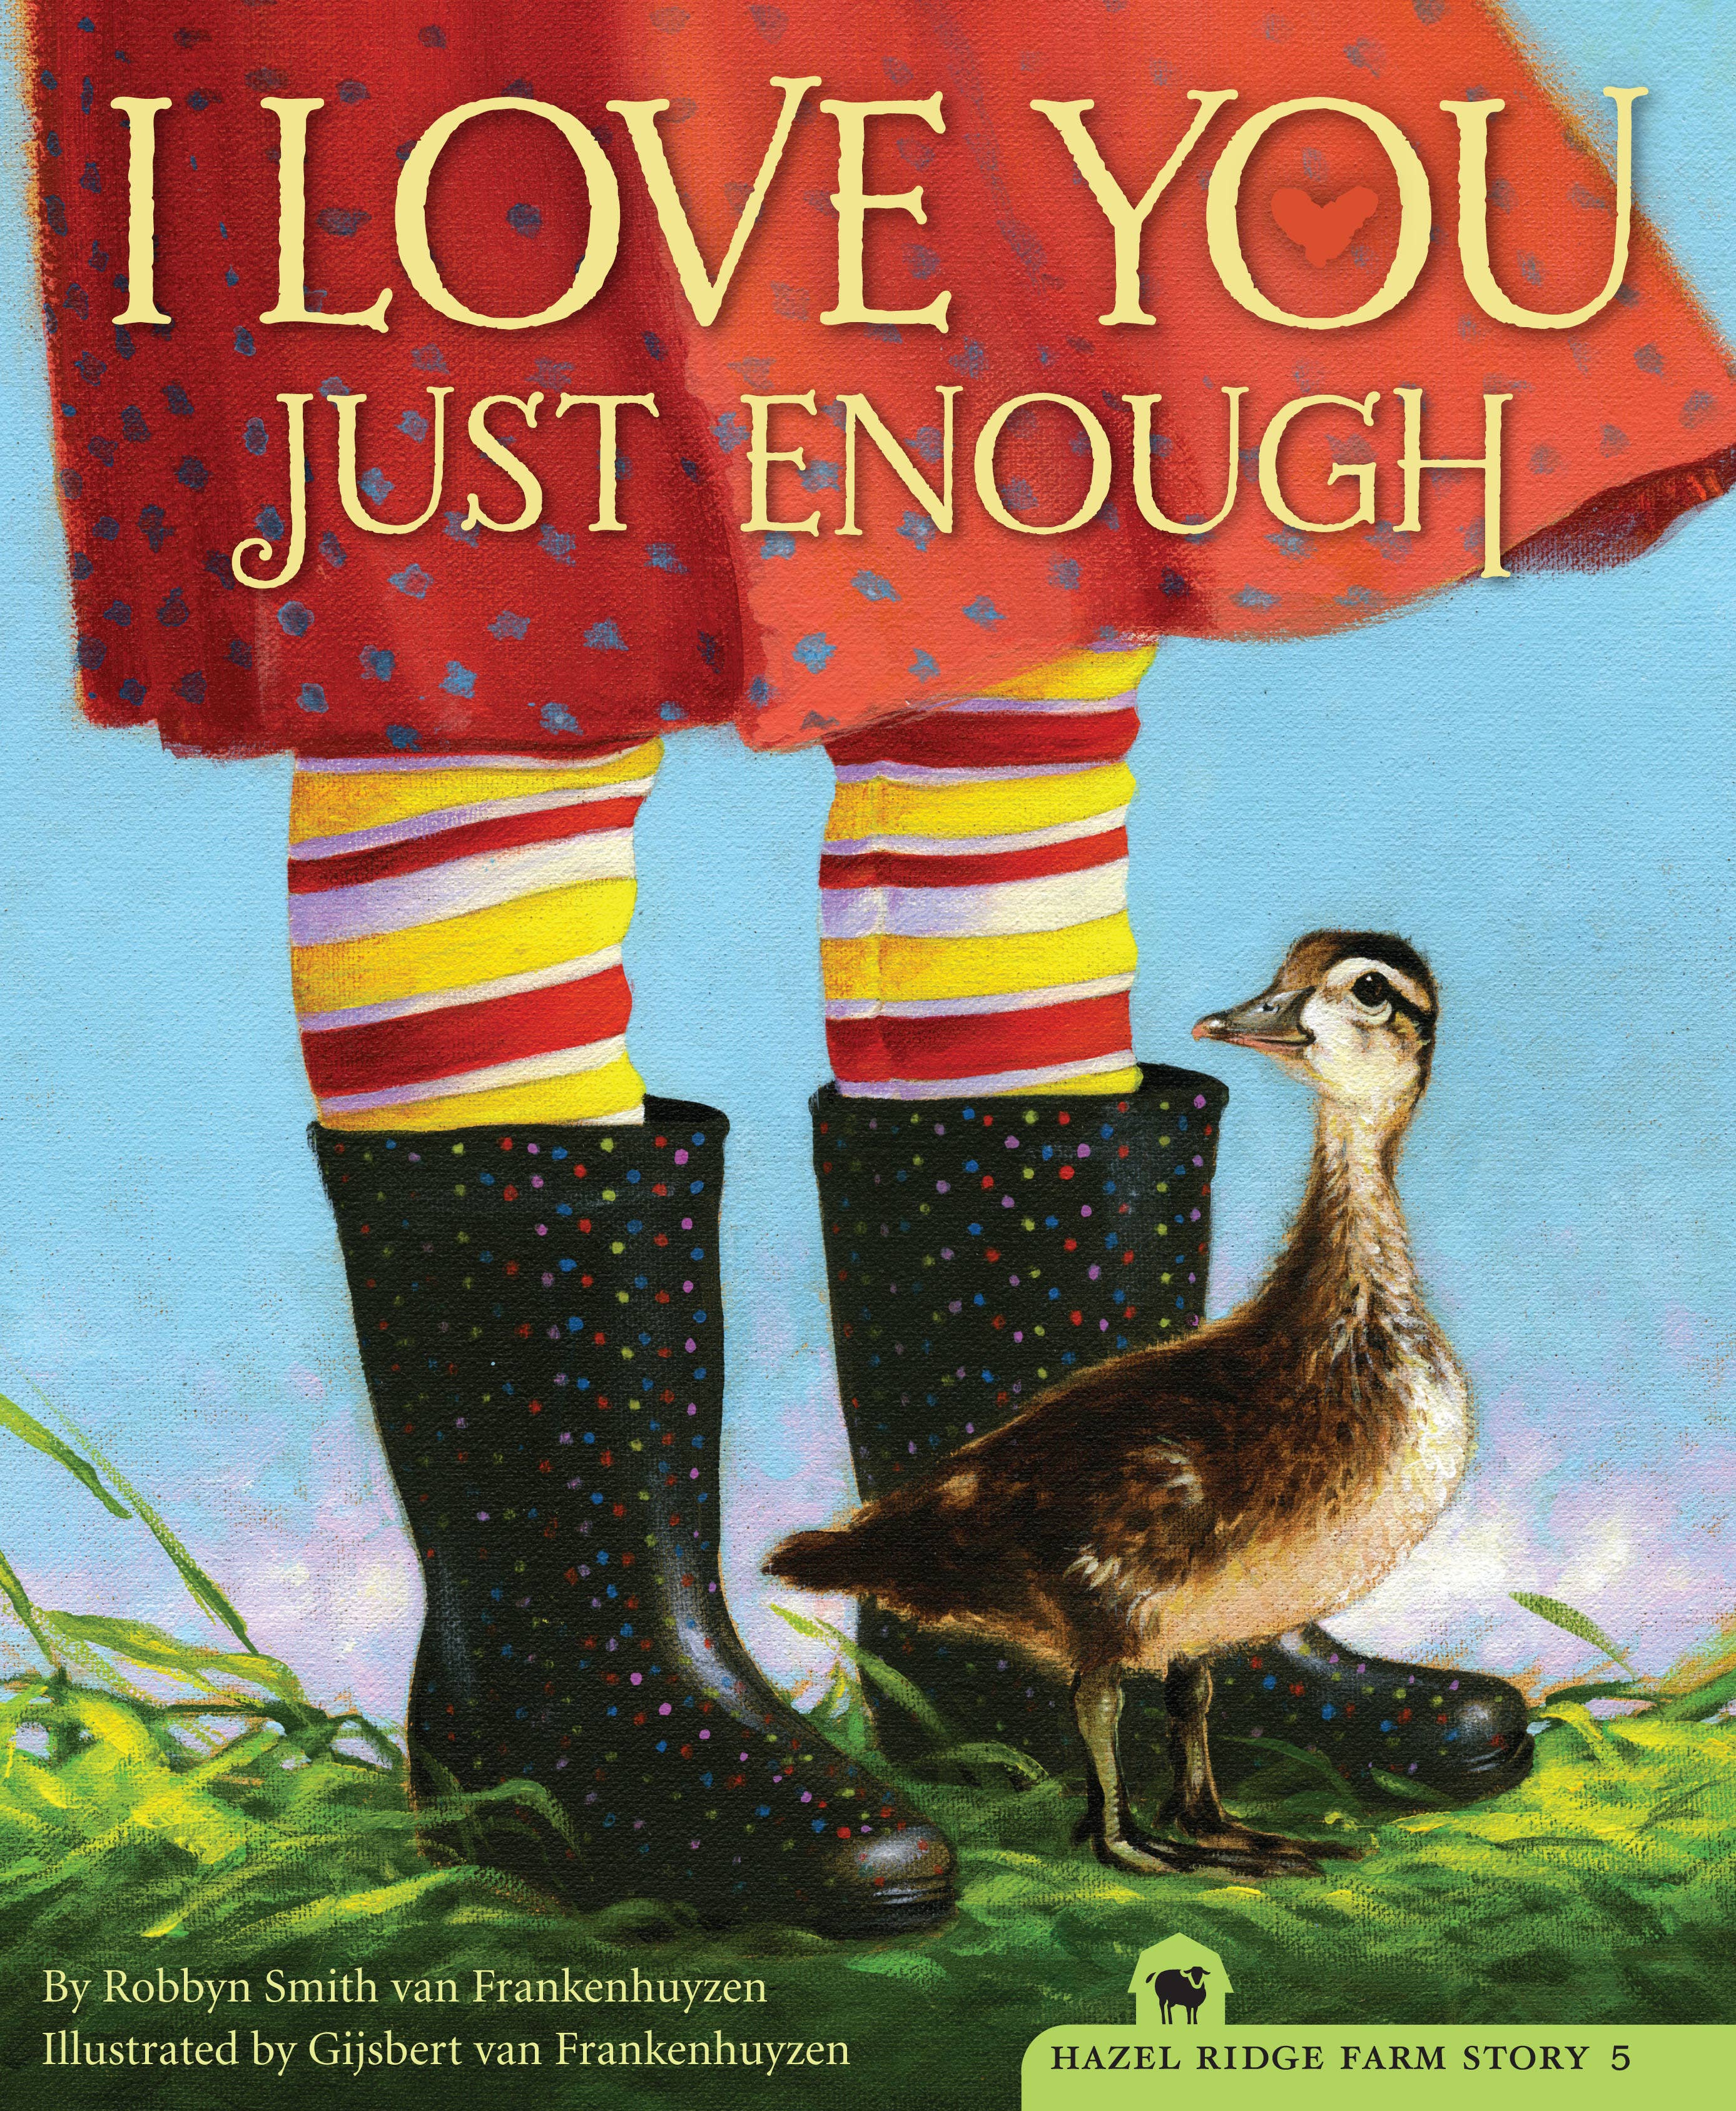 Childrens Book: I Love You Just Enough